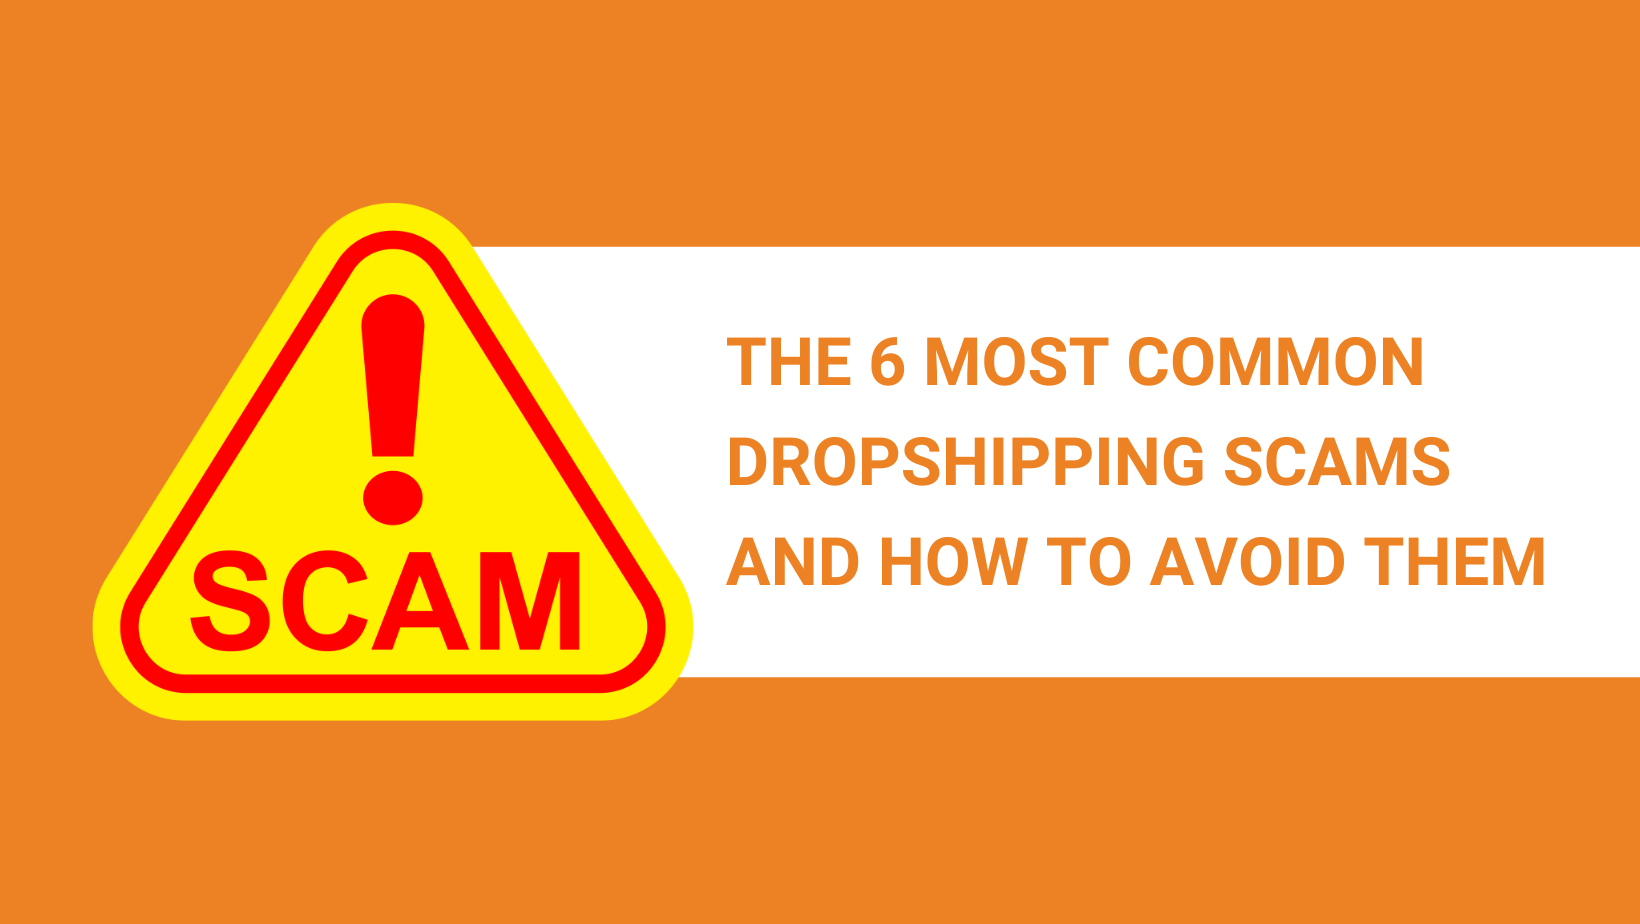 Haciendo Influencia Puntuación The 6 Most Common Dropshipping Scams and How to Avoid Them - Dropshipping  From China | NicheDropshipping